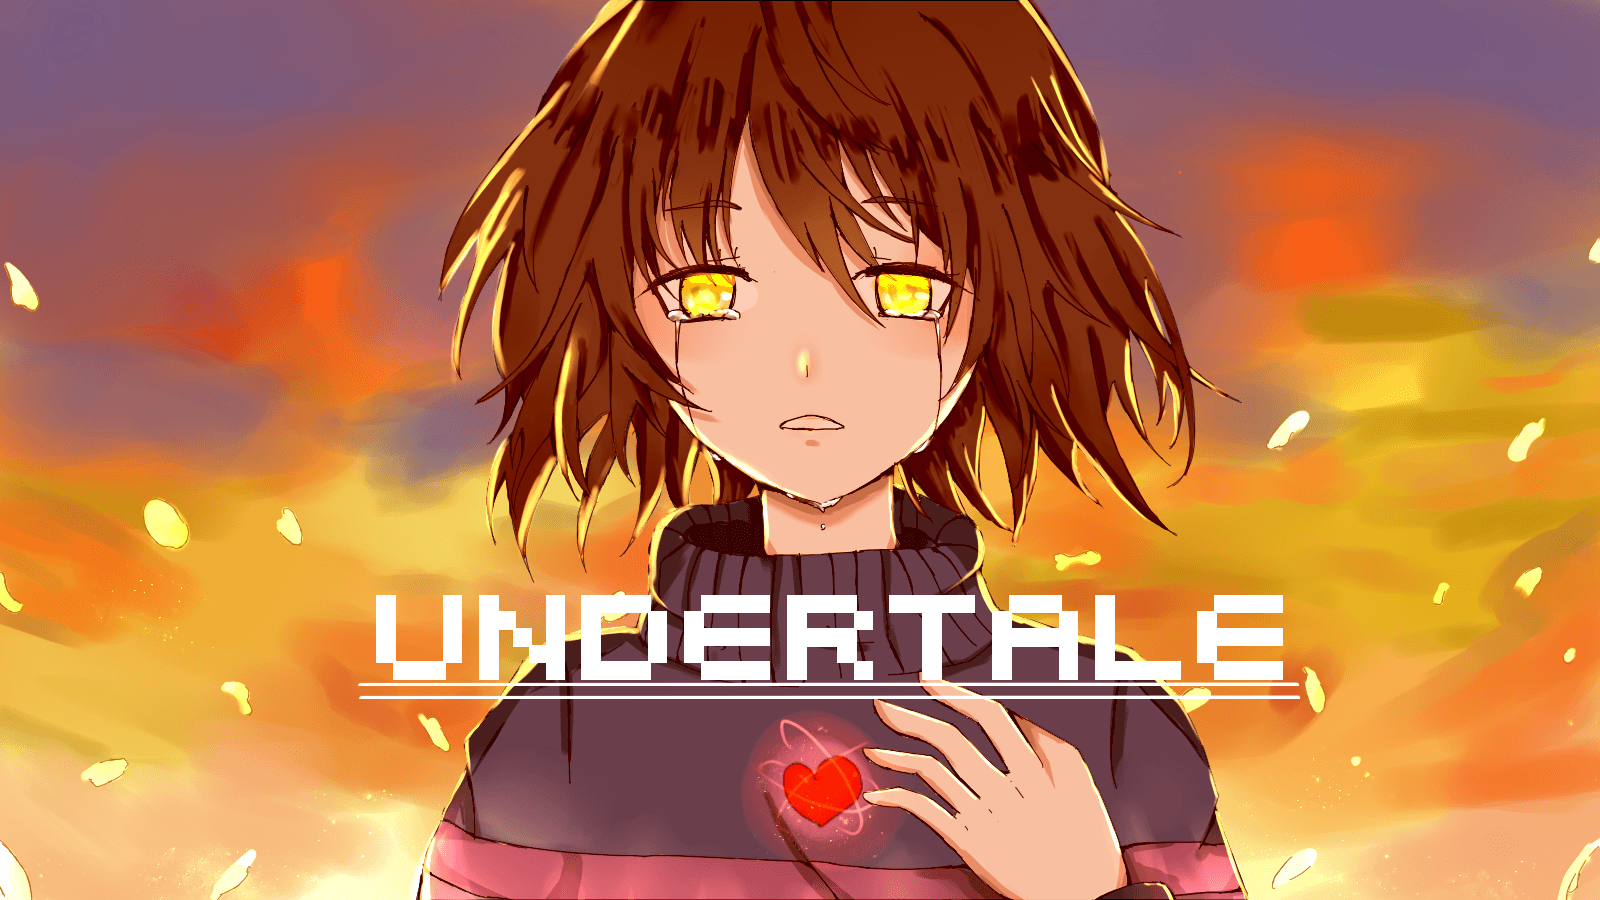 Anime Undertale Wallpapers Wallpaper Cave